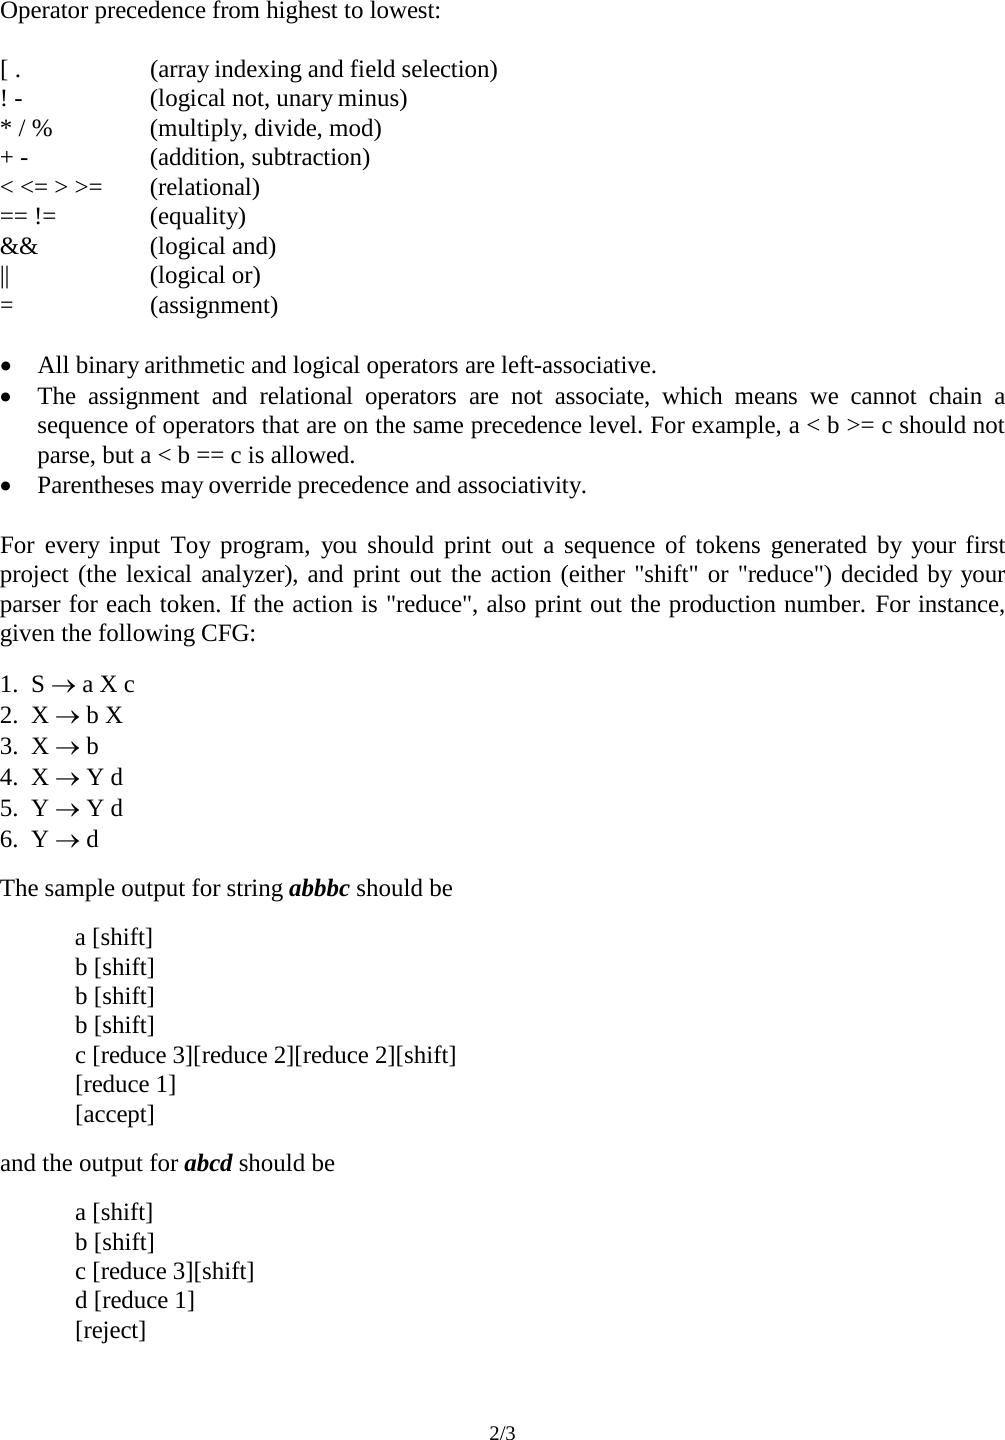 Page 2 of 3 - CS 440 Compiler Design I Instructions